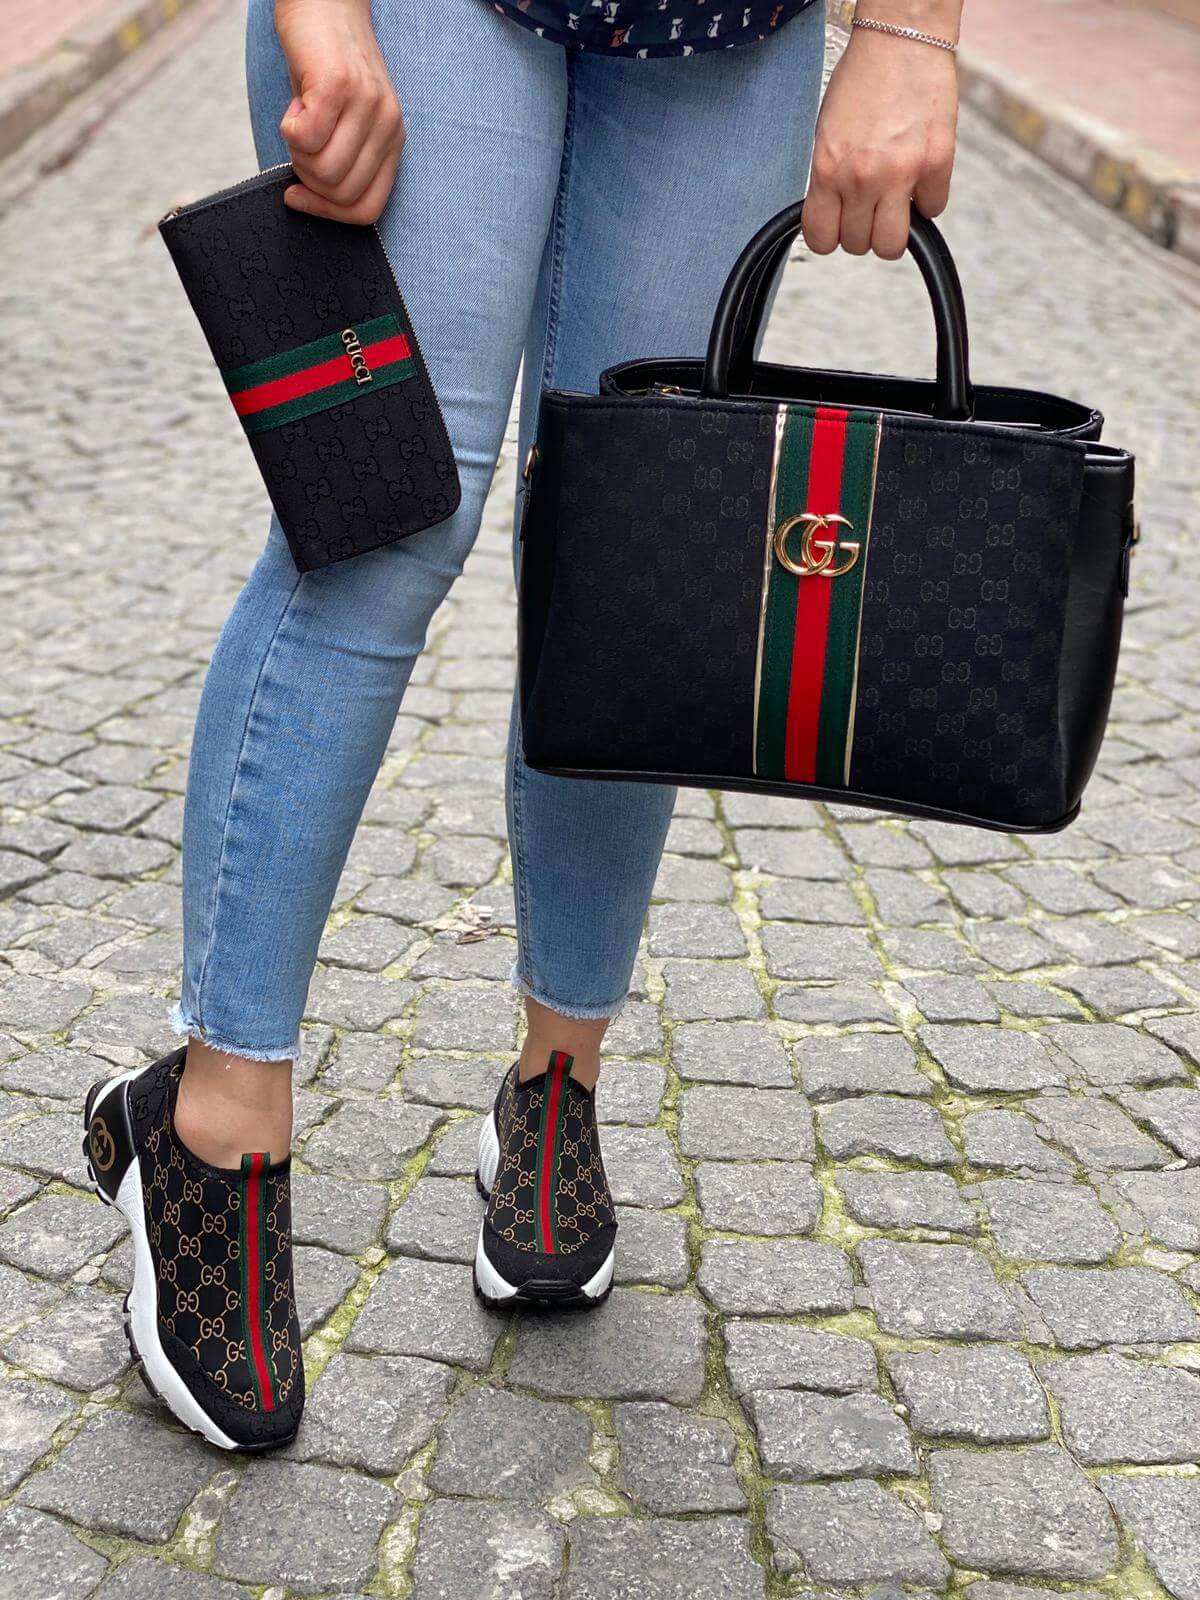 Gucci strech sneakers